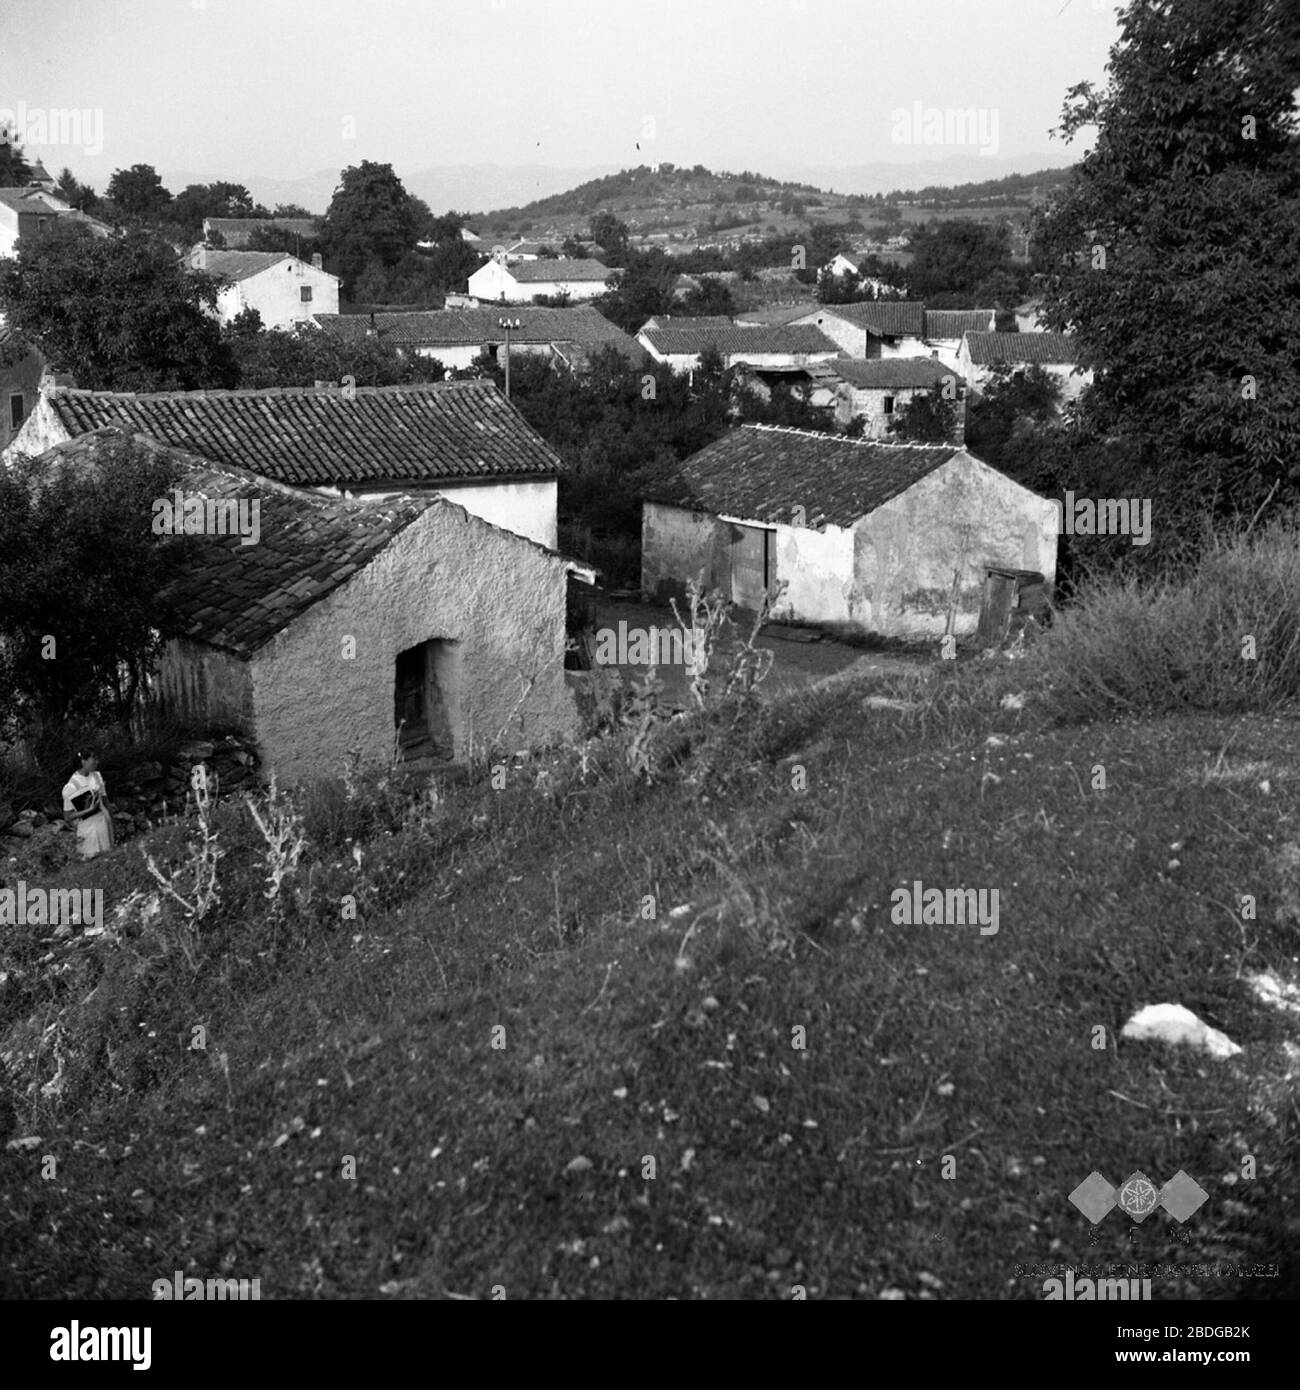 'Slovenščina: Račice, Ilirska Bistrica.; August 1955; This image or media is available on the Slovenian Ethnographic Museum's websiteunder the reference number brkini/f0000012492.This tag does not indicate the copyright status of the attached work. A normal copyright tag is still required. See Commons:Licensing. English | slovenščina | +/−; Fanči Šarf  (1924–)        Description Slovene ethnologist and photographer  Date of birth  1924   Location of birth  Ljubljana   Work period 20th century date QS:P,+1950-00-00T00:00:00Z/7  Authority control  : Q41784719 VIAF: 239813517 ISNI: 0000 0003 8562 Stock Photo